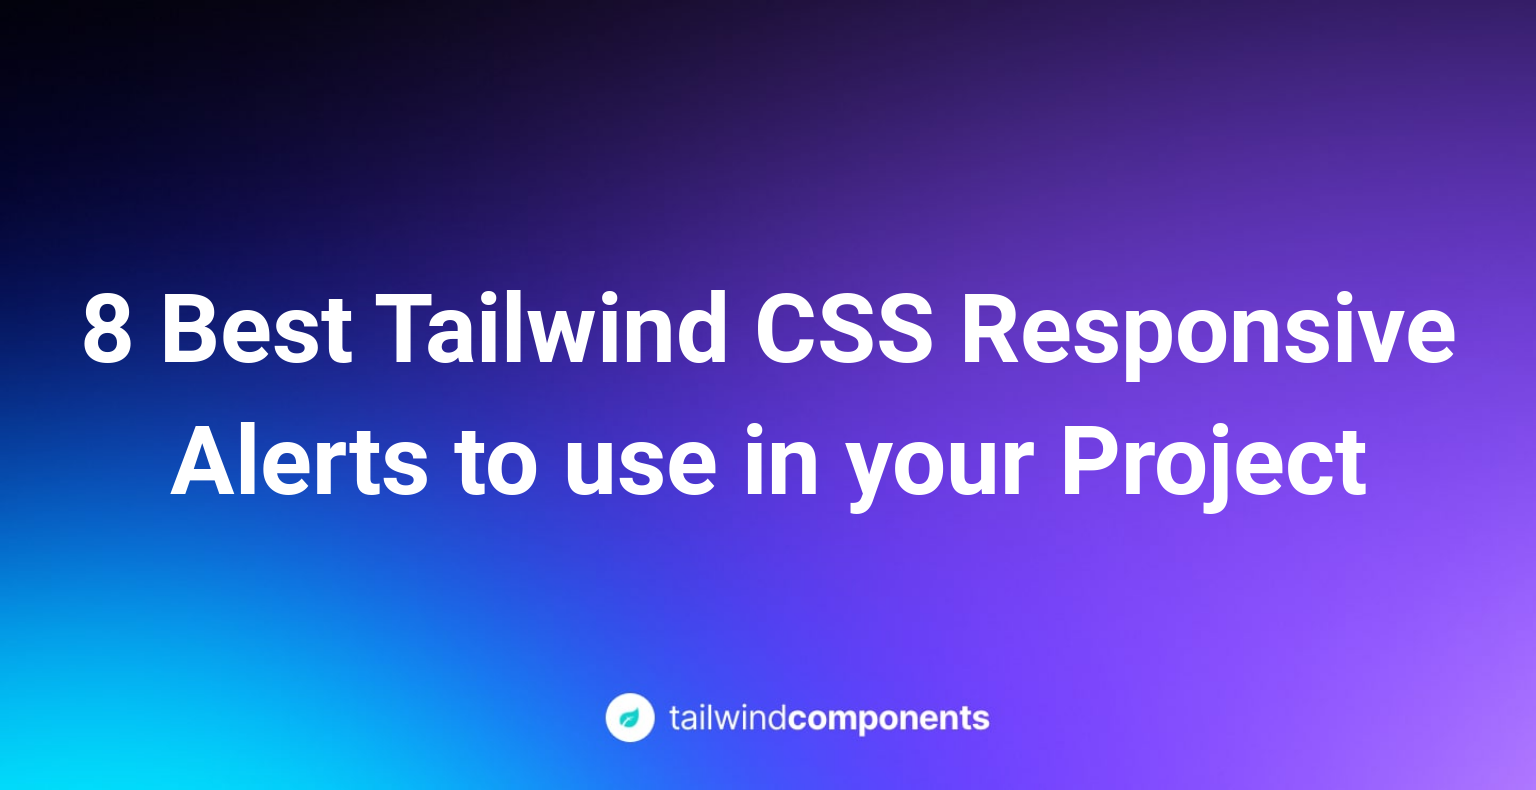 8 Best Tailwind CSS Responsive Alerts to use in your Project Image